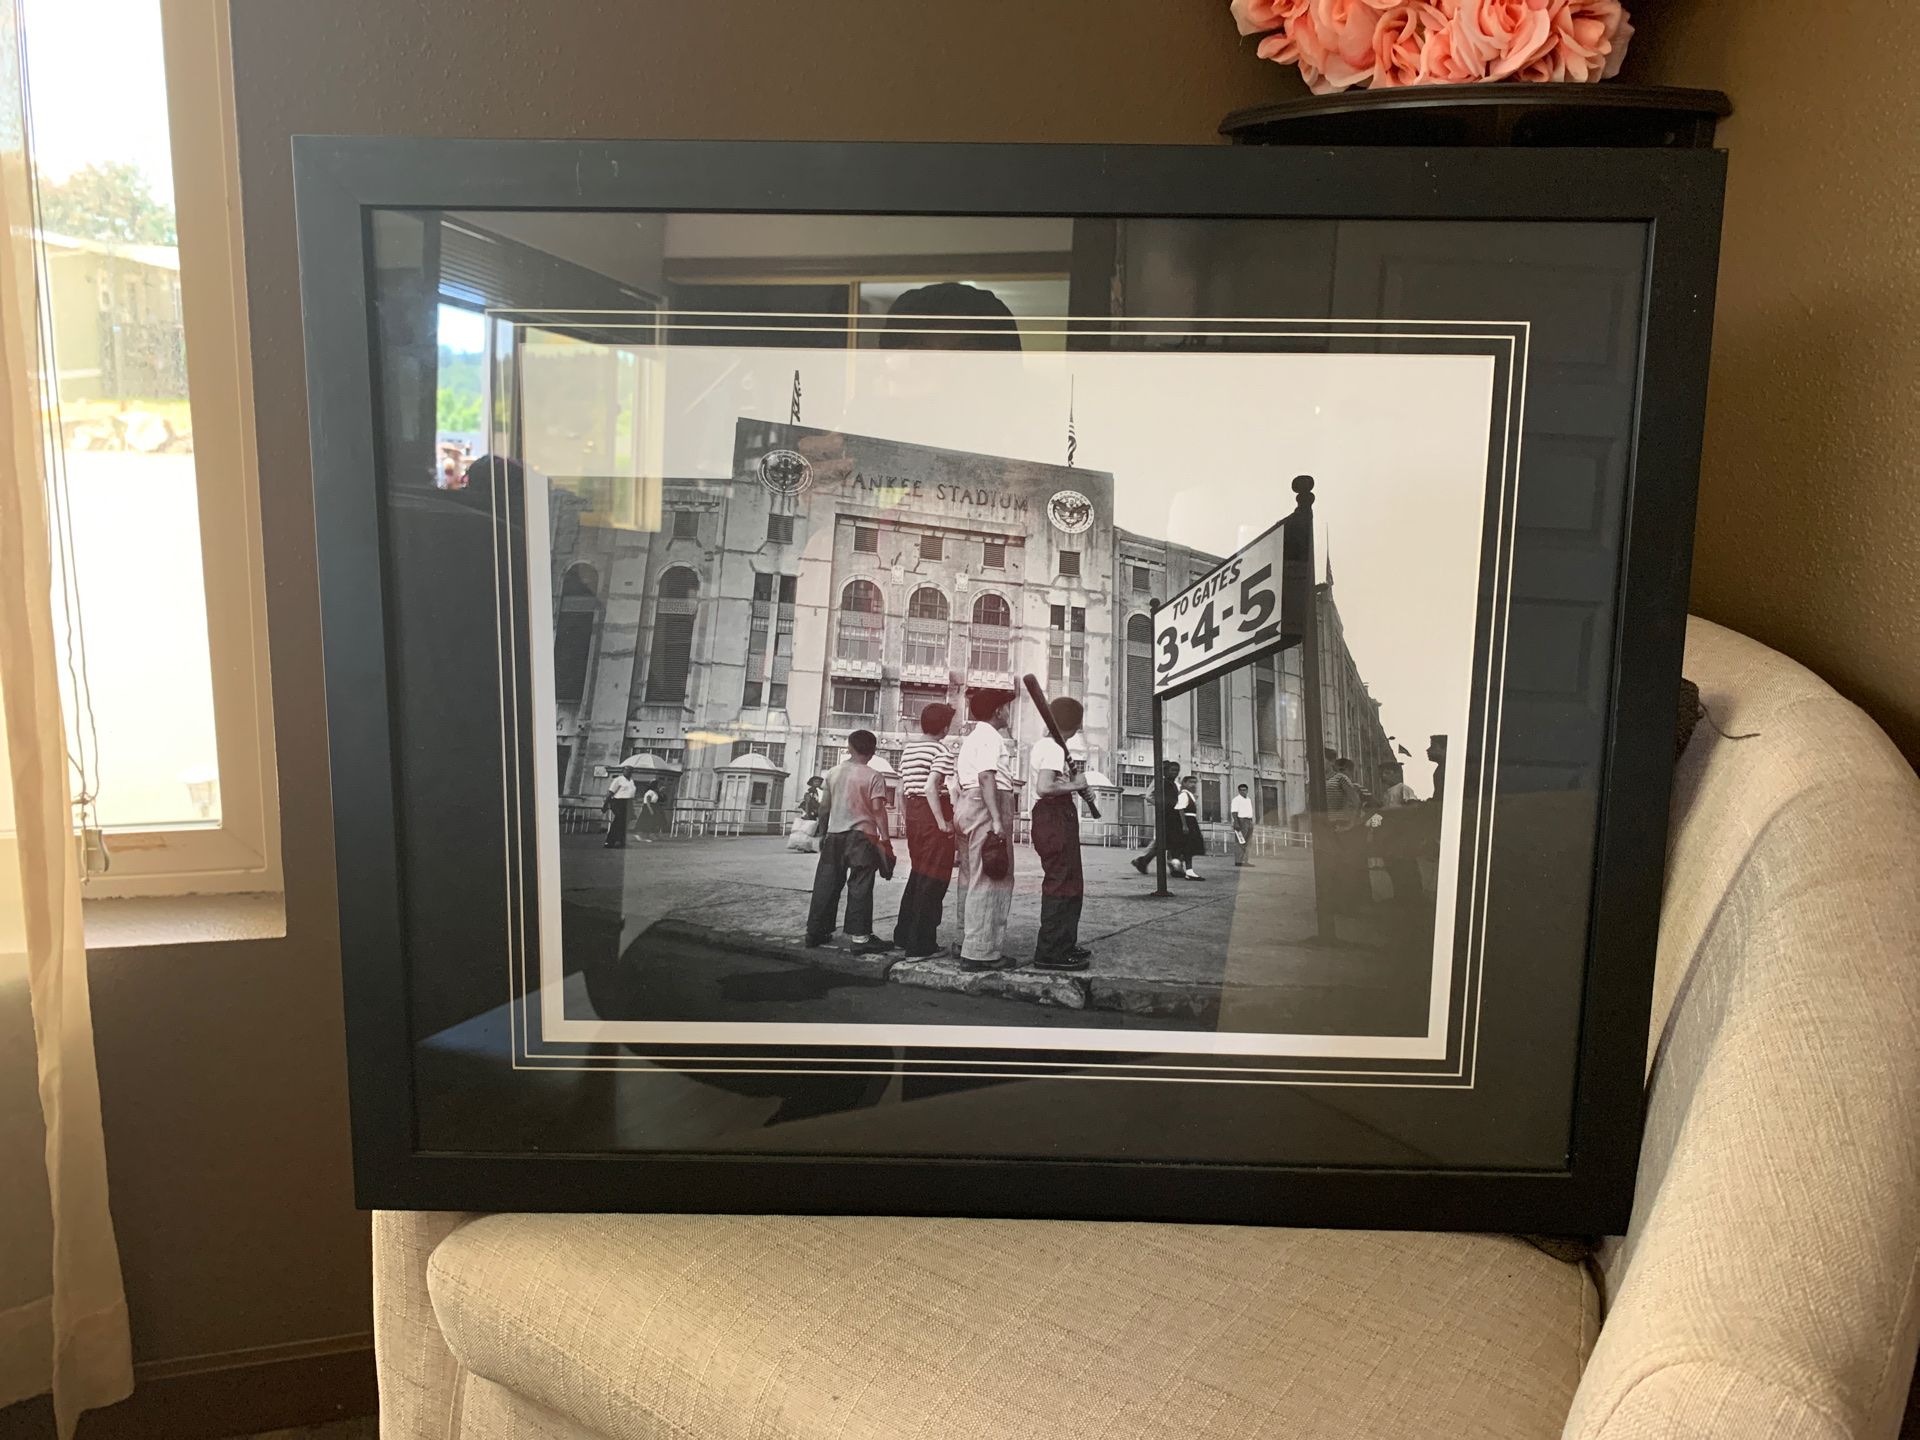 Baseball boys picture frame from the year 1948